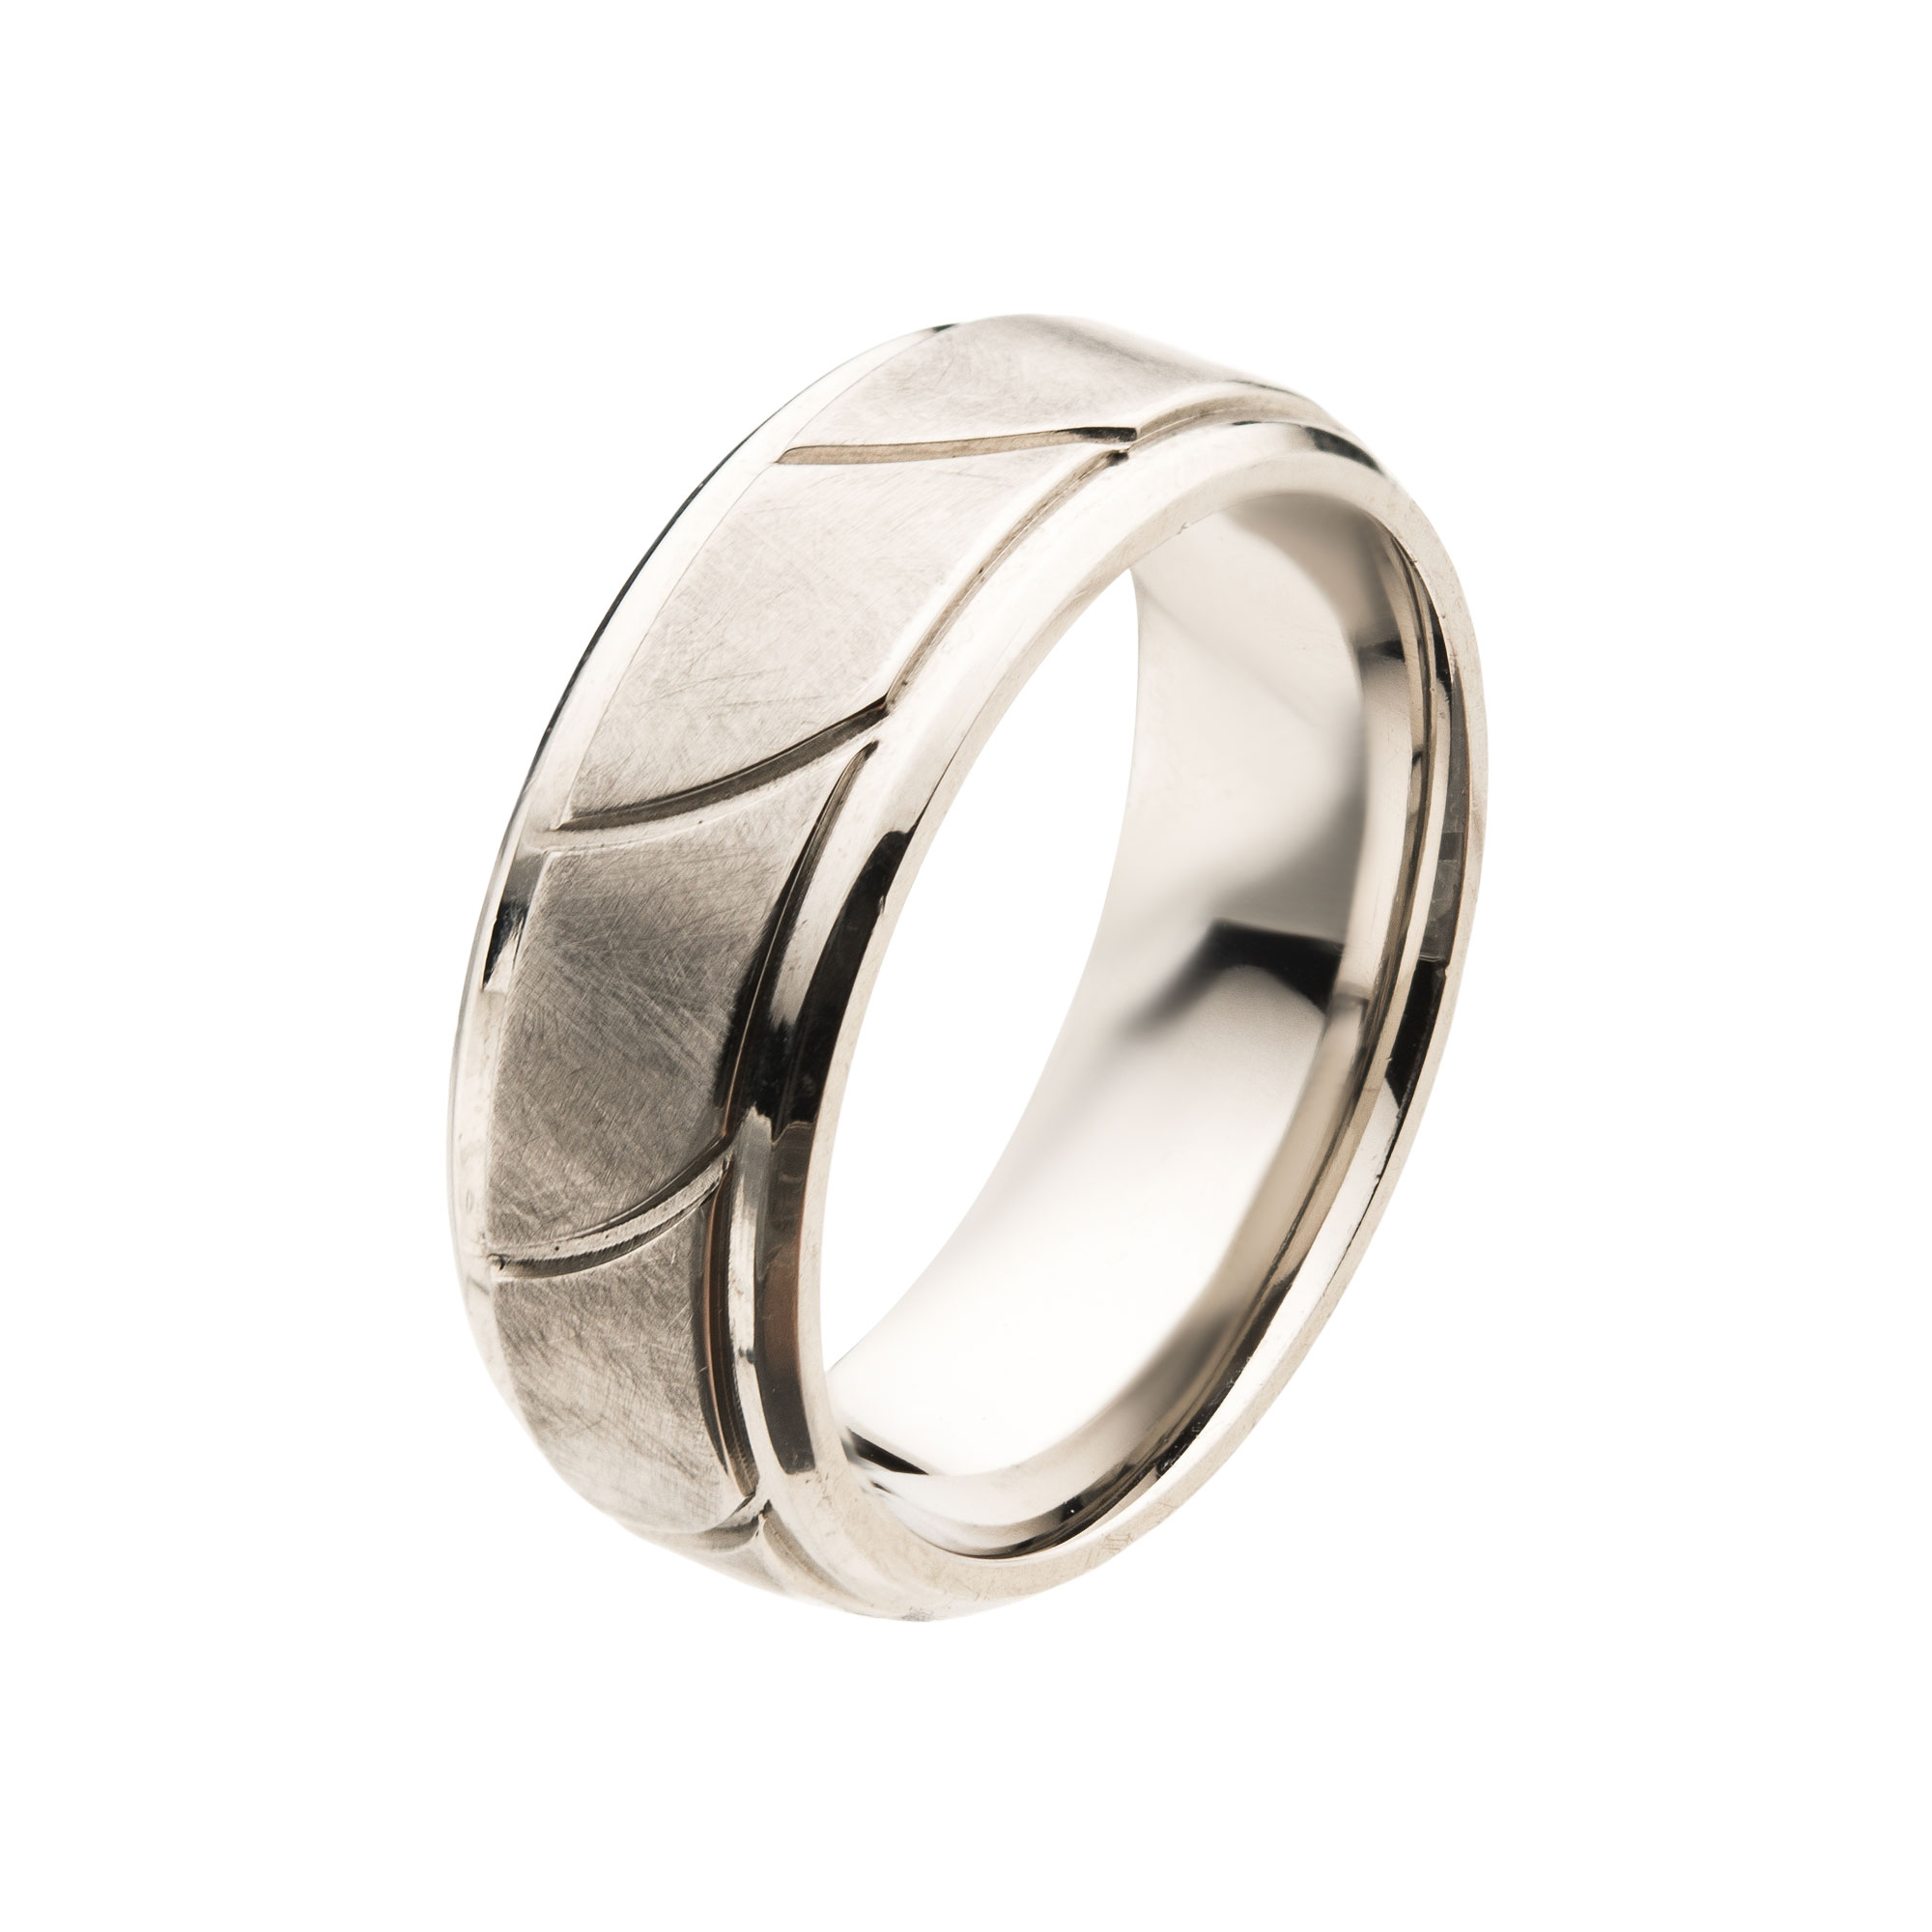 Steel Brushed with Grooves Beveled Ring Carroll / Ochs Jewelers Monroe, MI